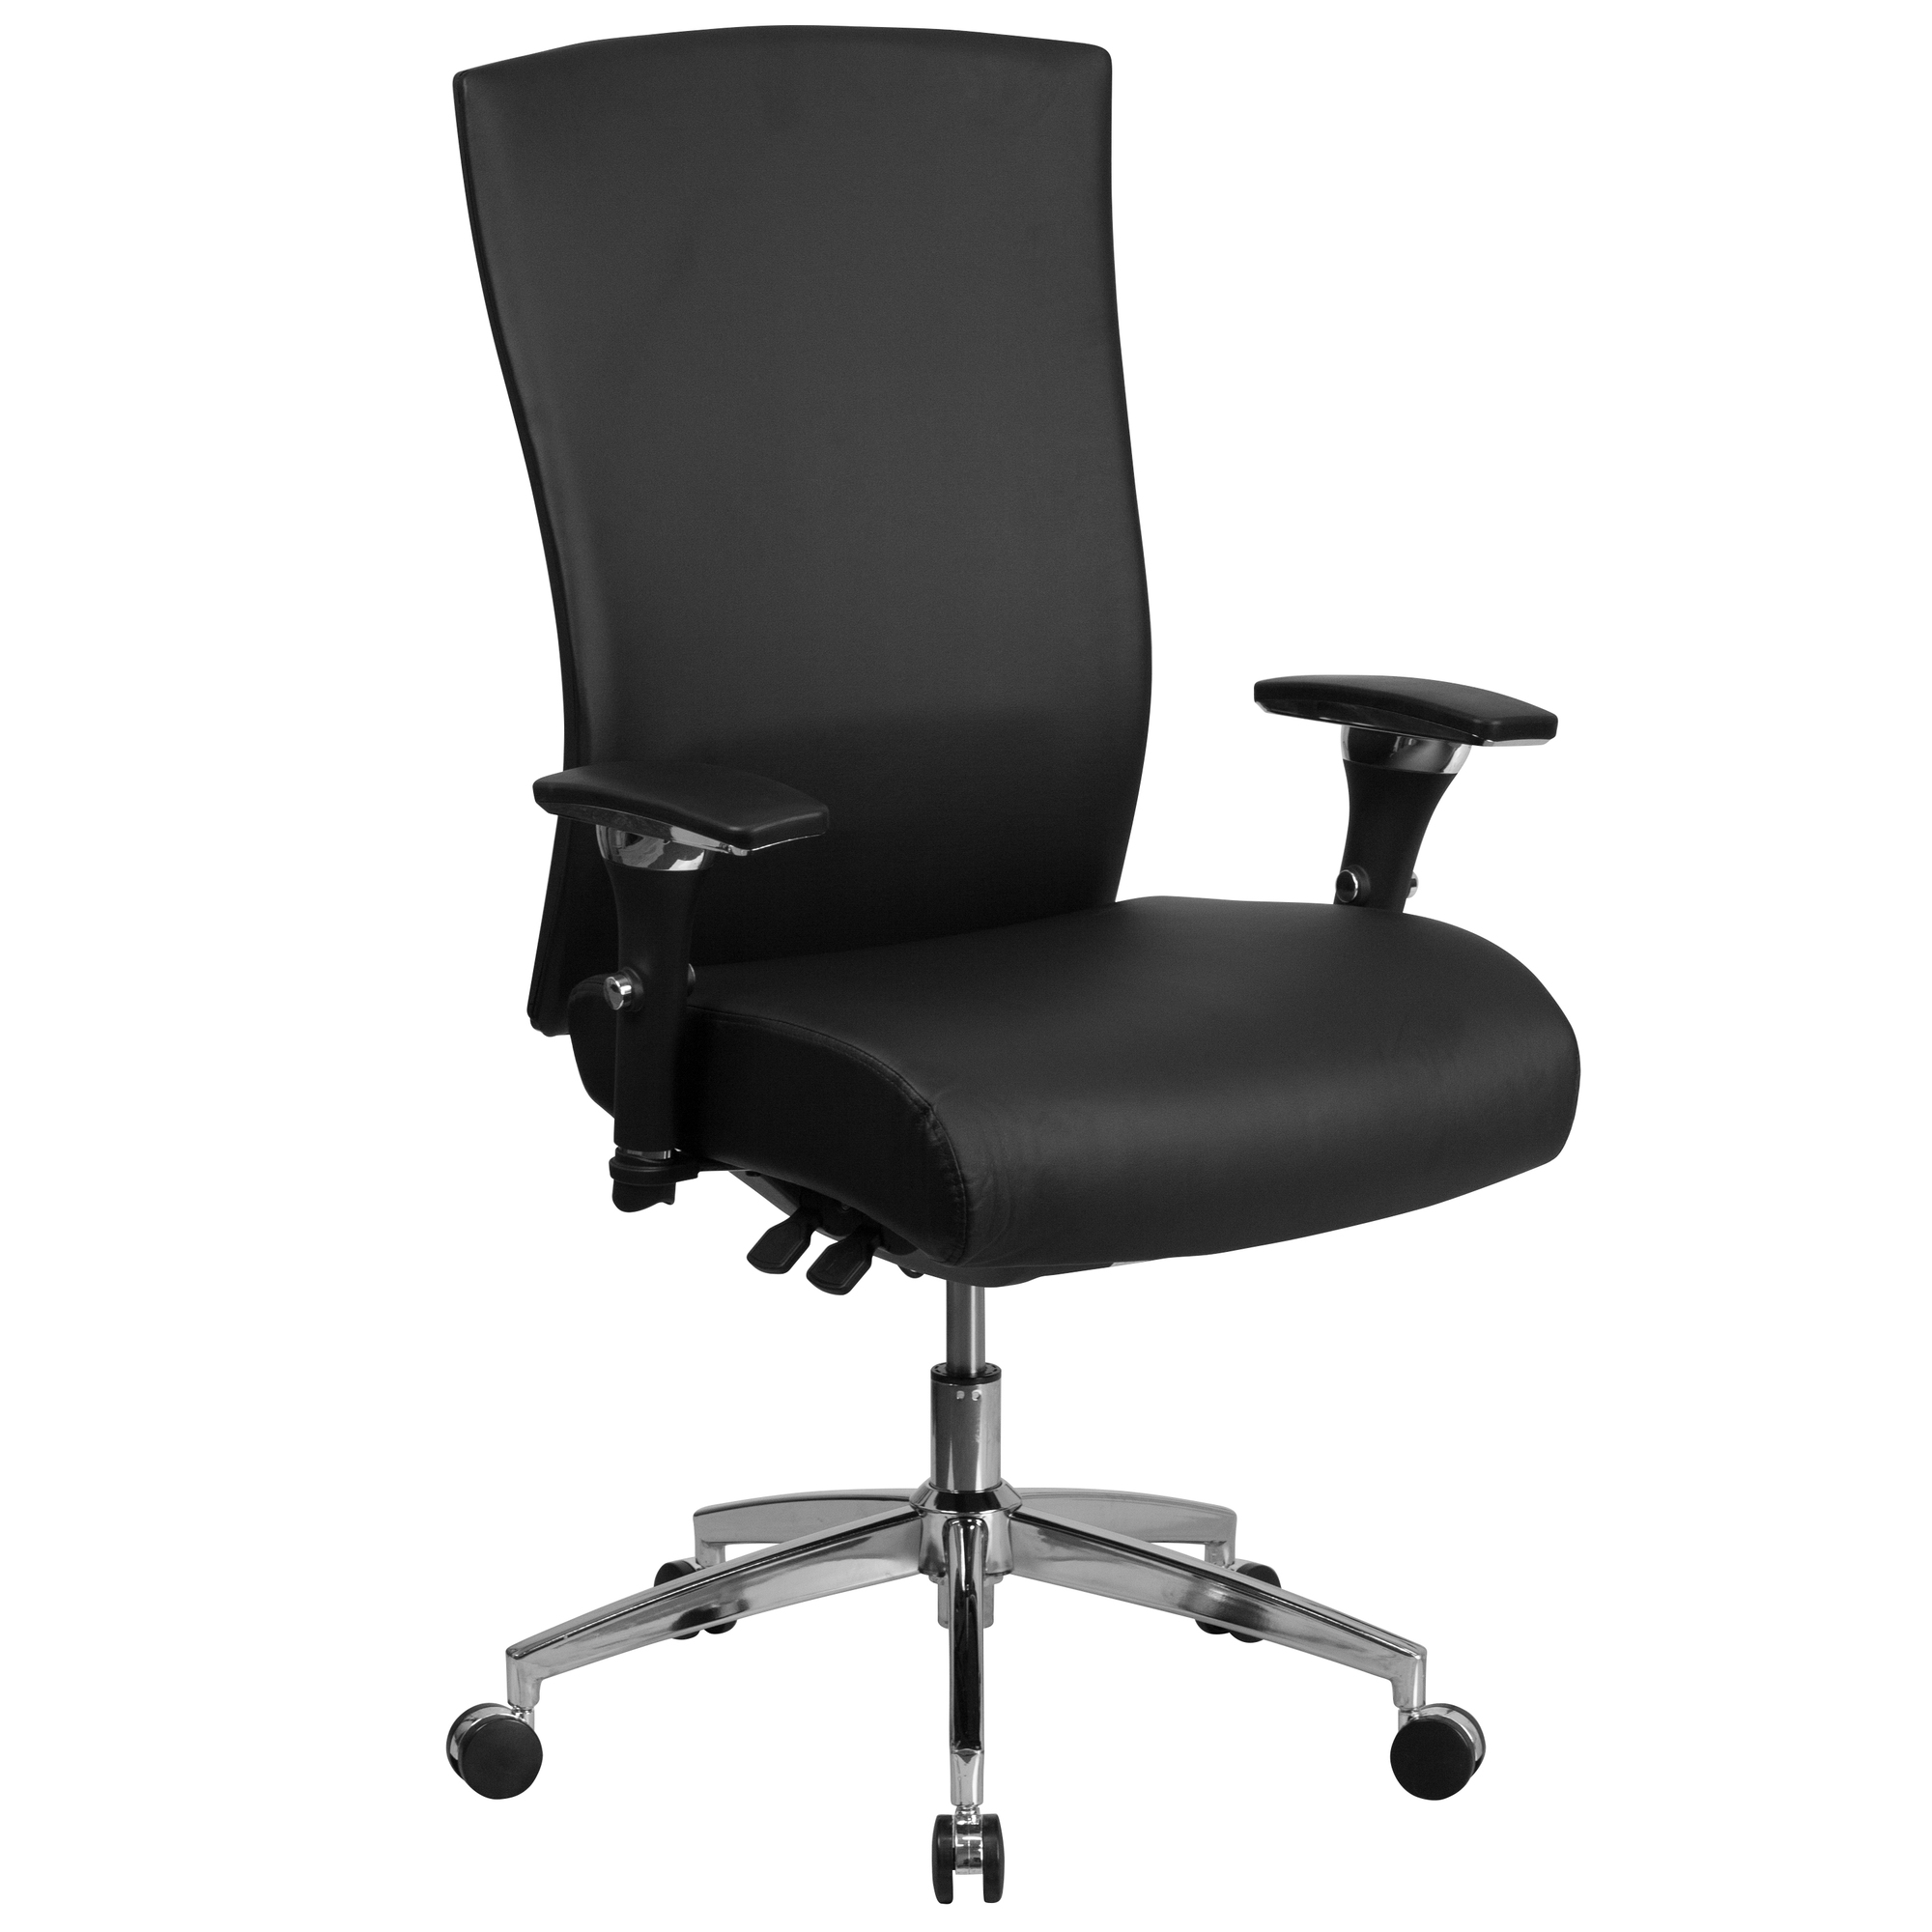 Flash Furniture, 24/7 300 lb. Rated Black LeatherSoft Chair, Primary Color Black, Included (qty.) 1, Model GOWY85H1